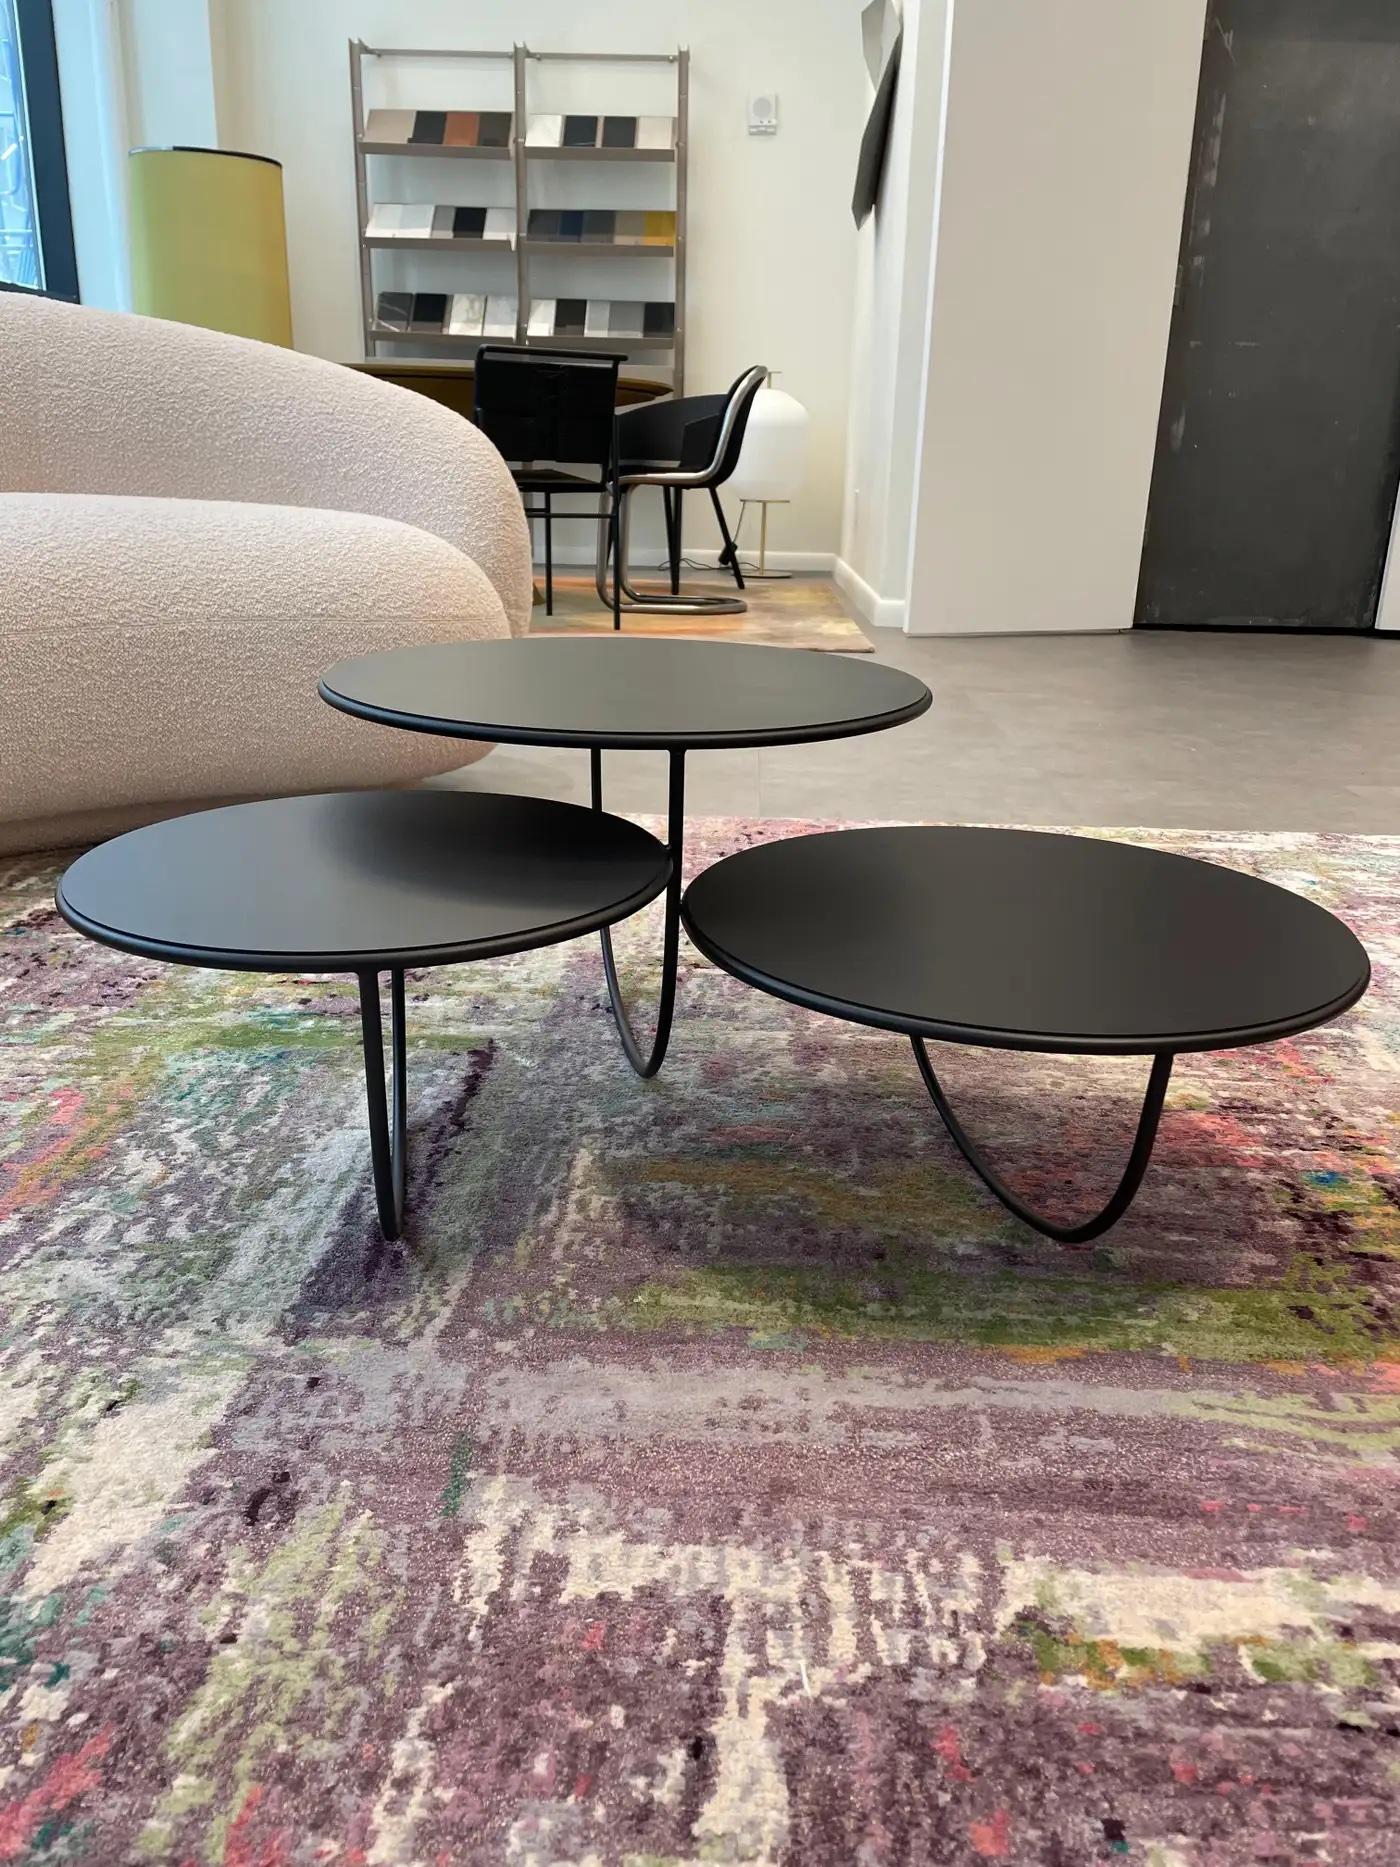 At first sight, Trio is a side table that consists of three transparent bowls overlapping one another. The opening of each bowl is covered with either a glass, metal or wood top. The shape of the bowl is suggested by a single curved line — seemingly